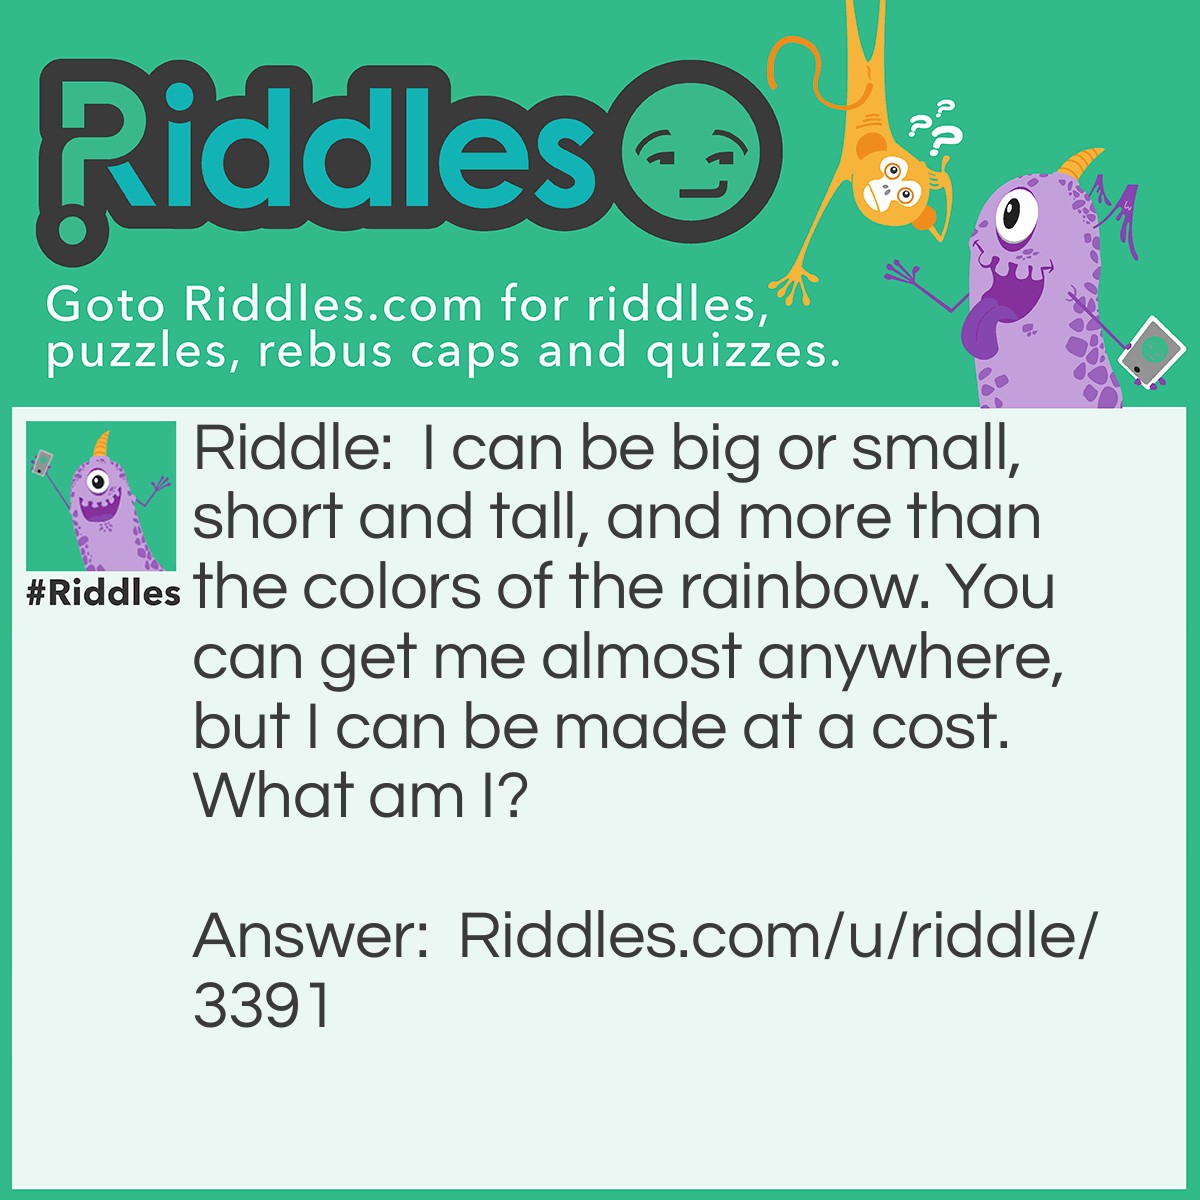 Riddle: I can be big or small, short and tall, and more than the colors of the rainbow. You can get me almost anywhere, but I can be made at a cost. What am I? Answer: Paper.